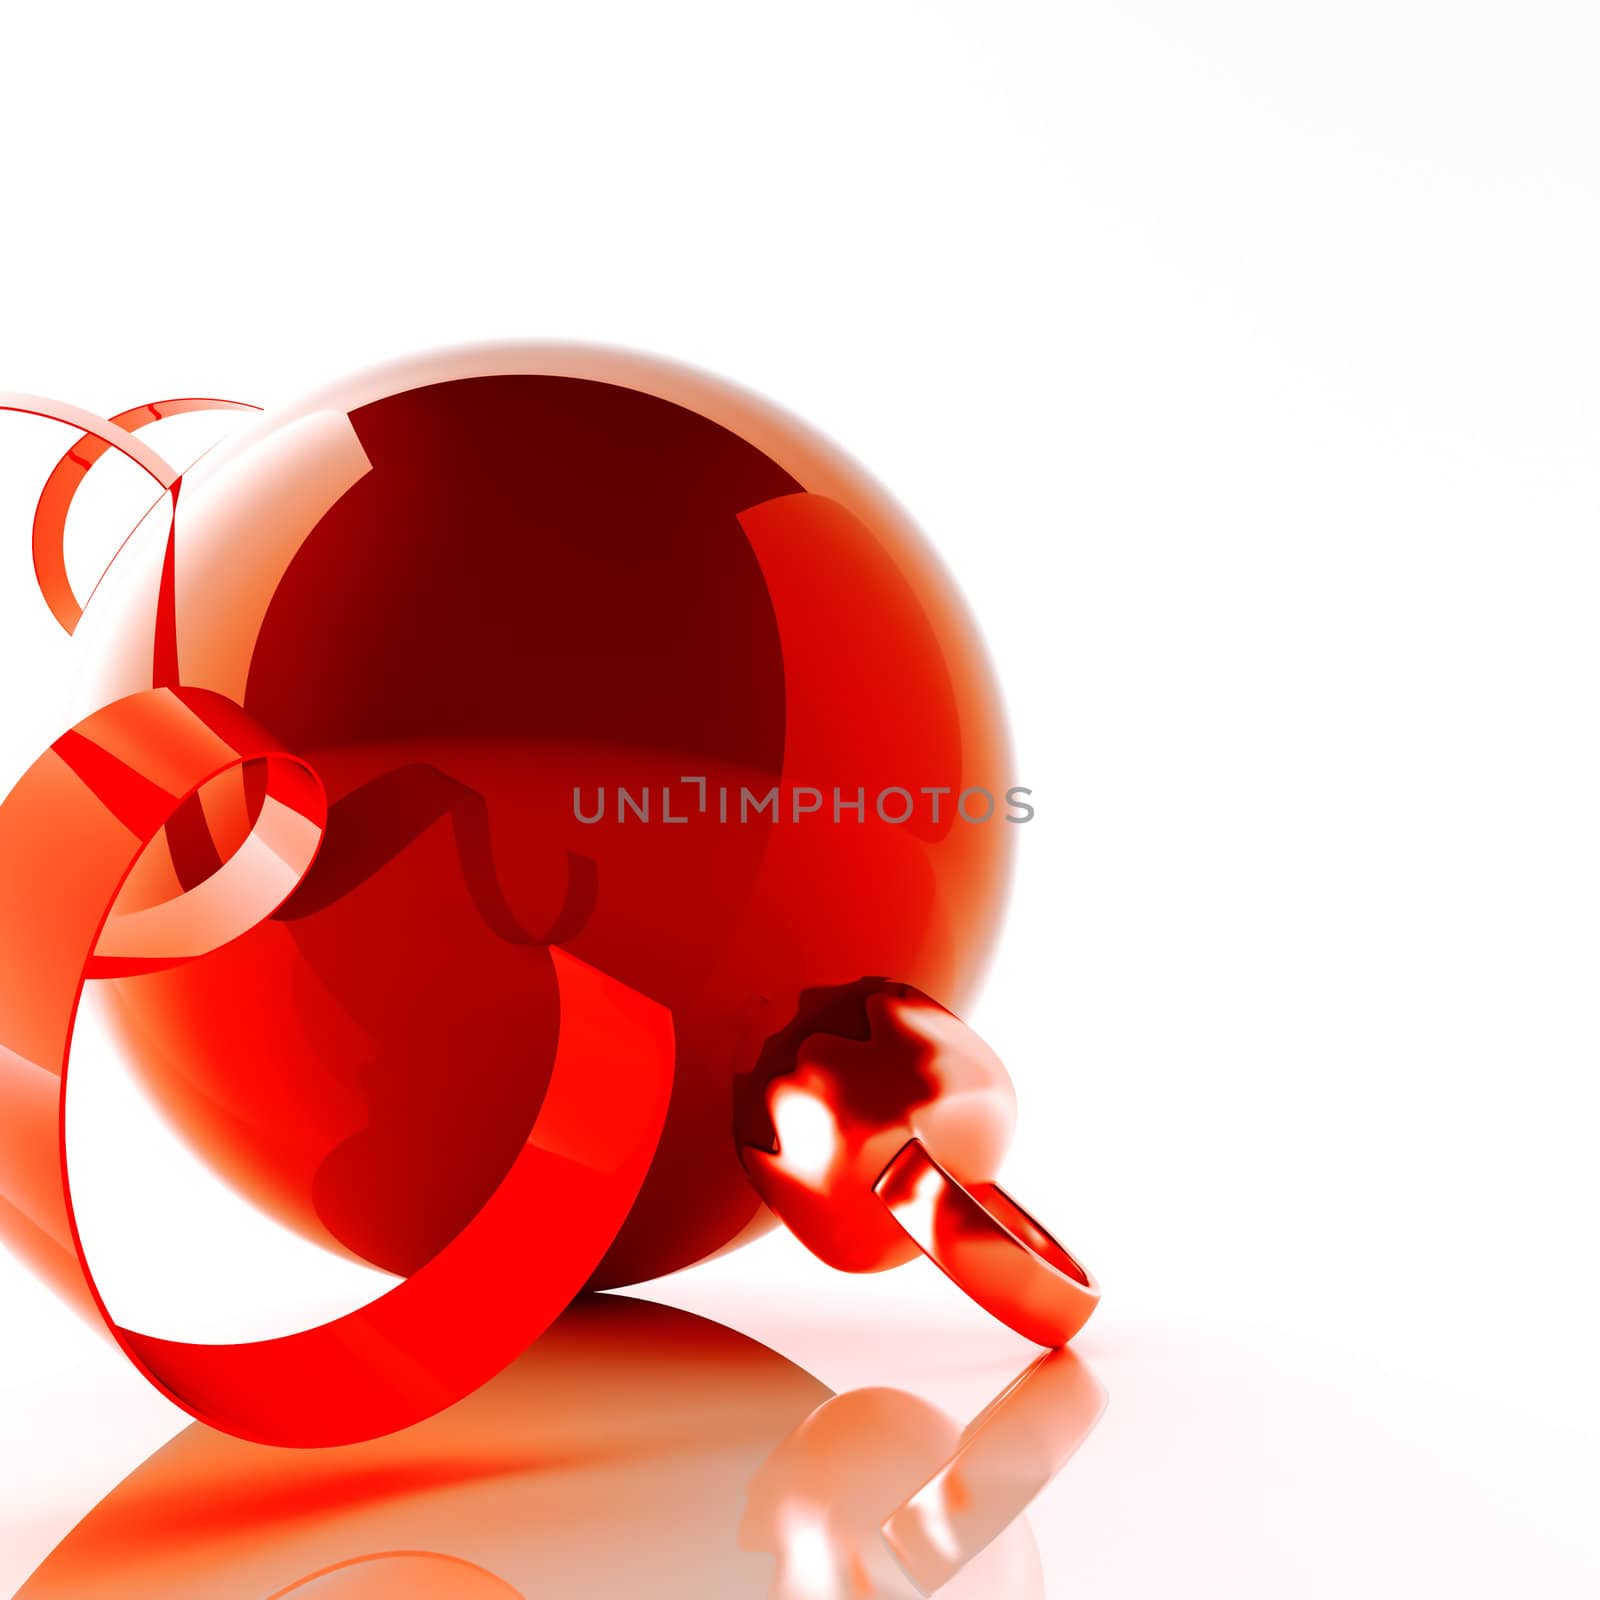 red christmas ball with tinsel on white background